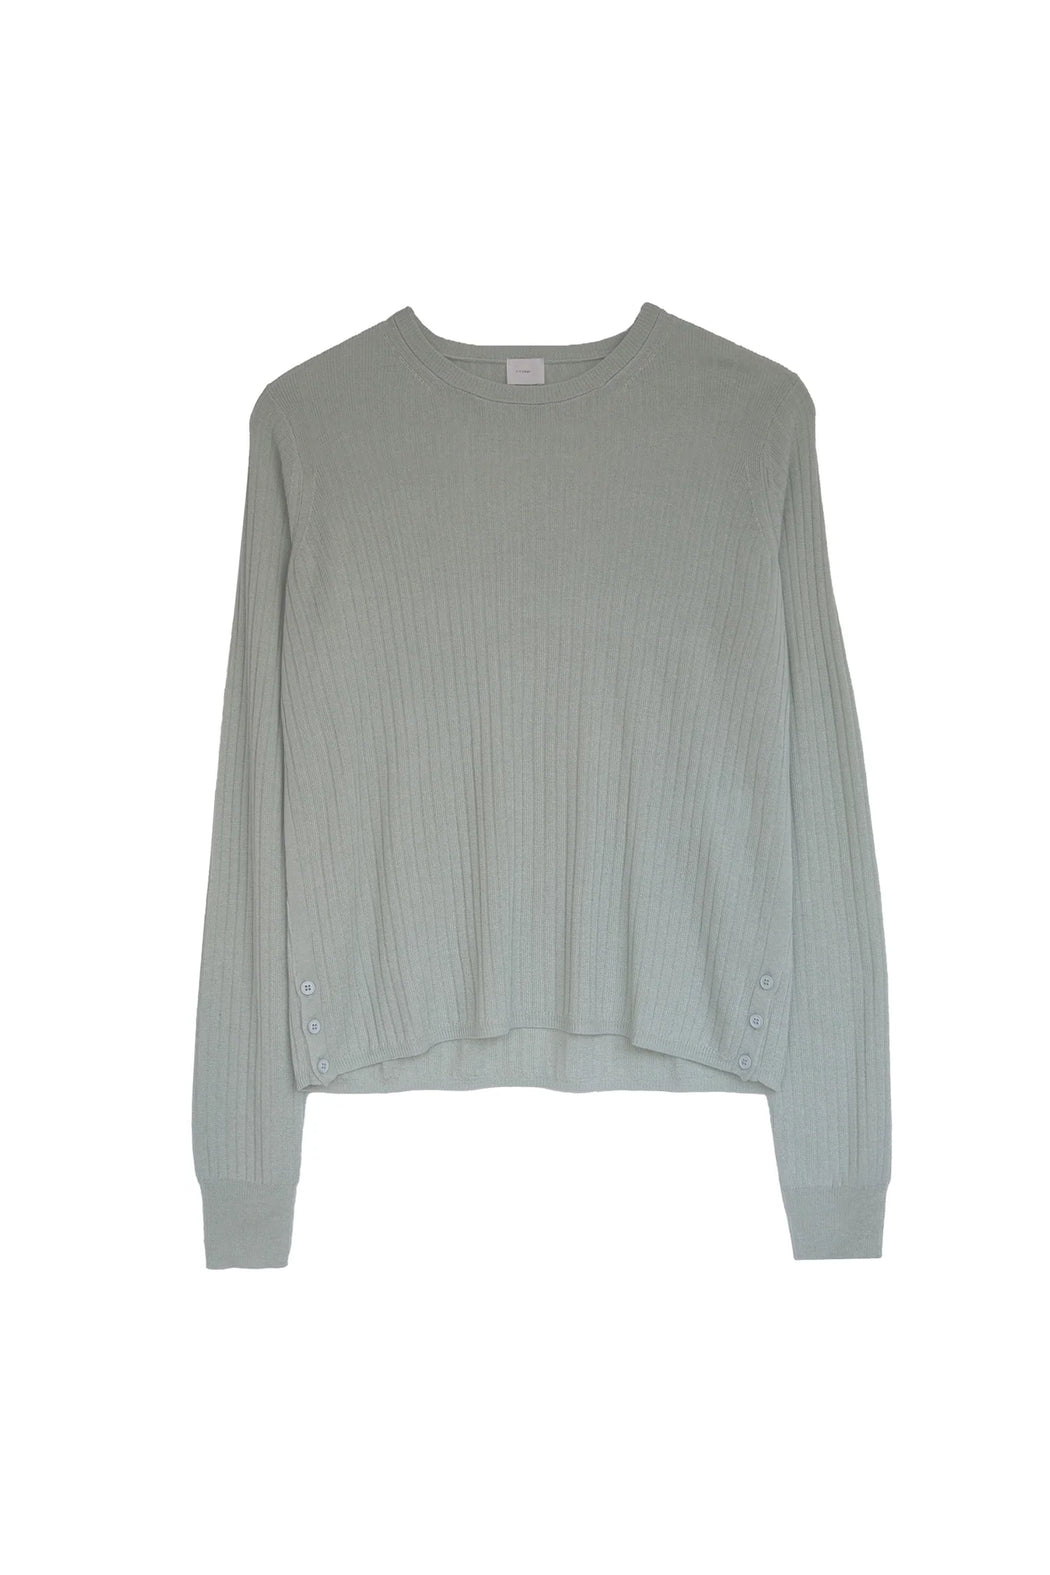 CT Plage :: Side Button Sweater